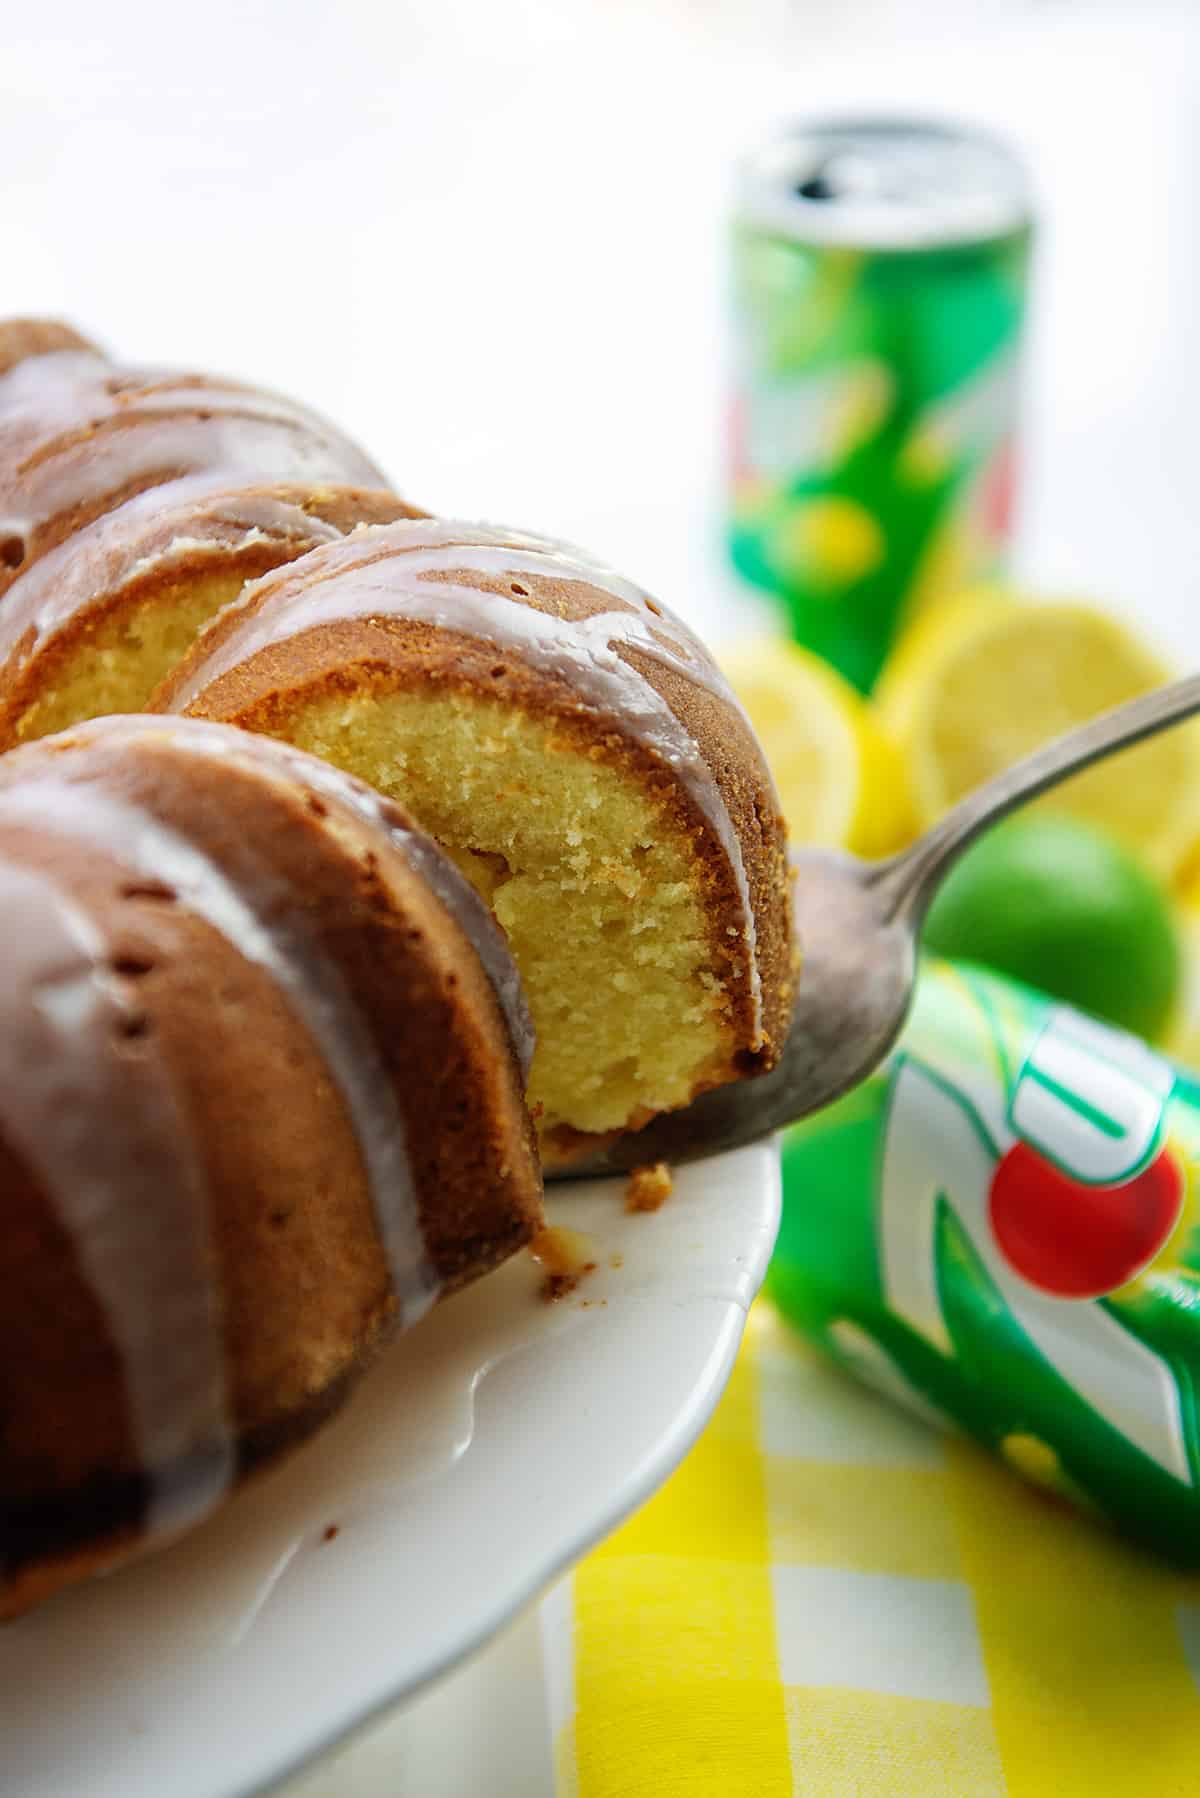 7 up cake on cake server next to cans of 7 up soda.